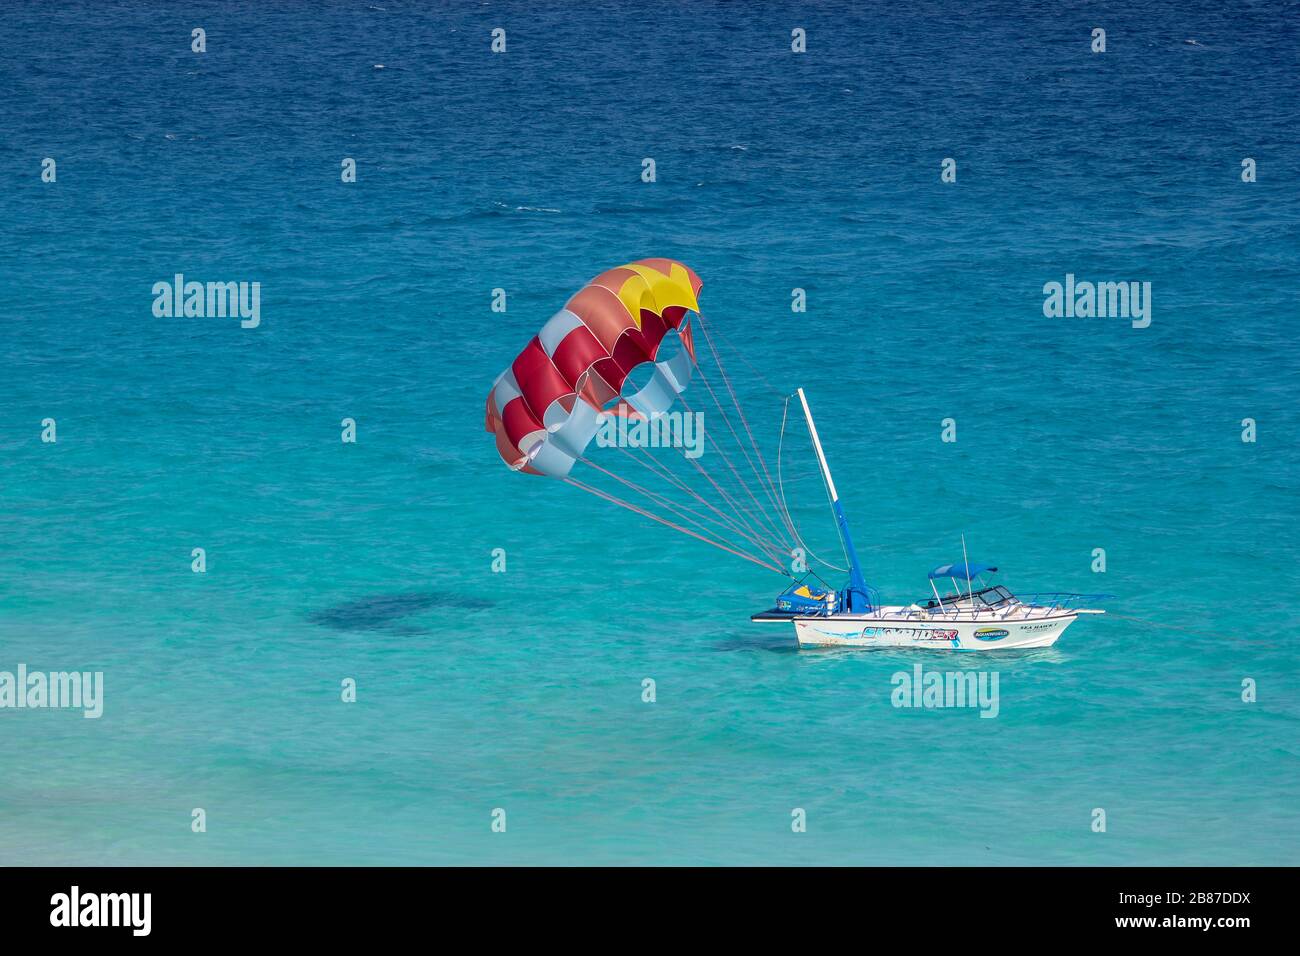 Parasailing boat on the waters of a beach in the Hotel Zone, Cancun, Quintana Roo, Yucatan Peninsula, Mexico Stock Photo